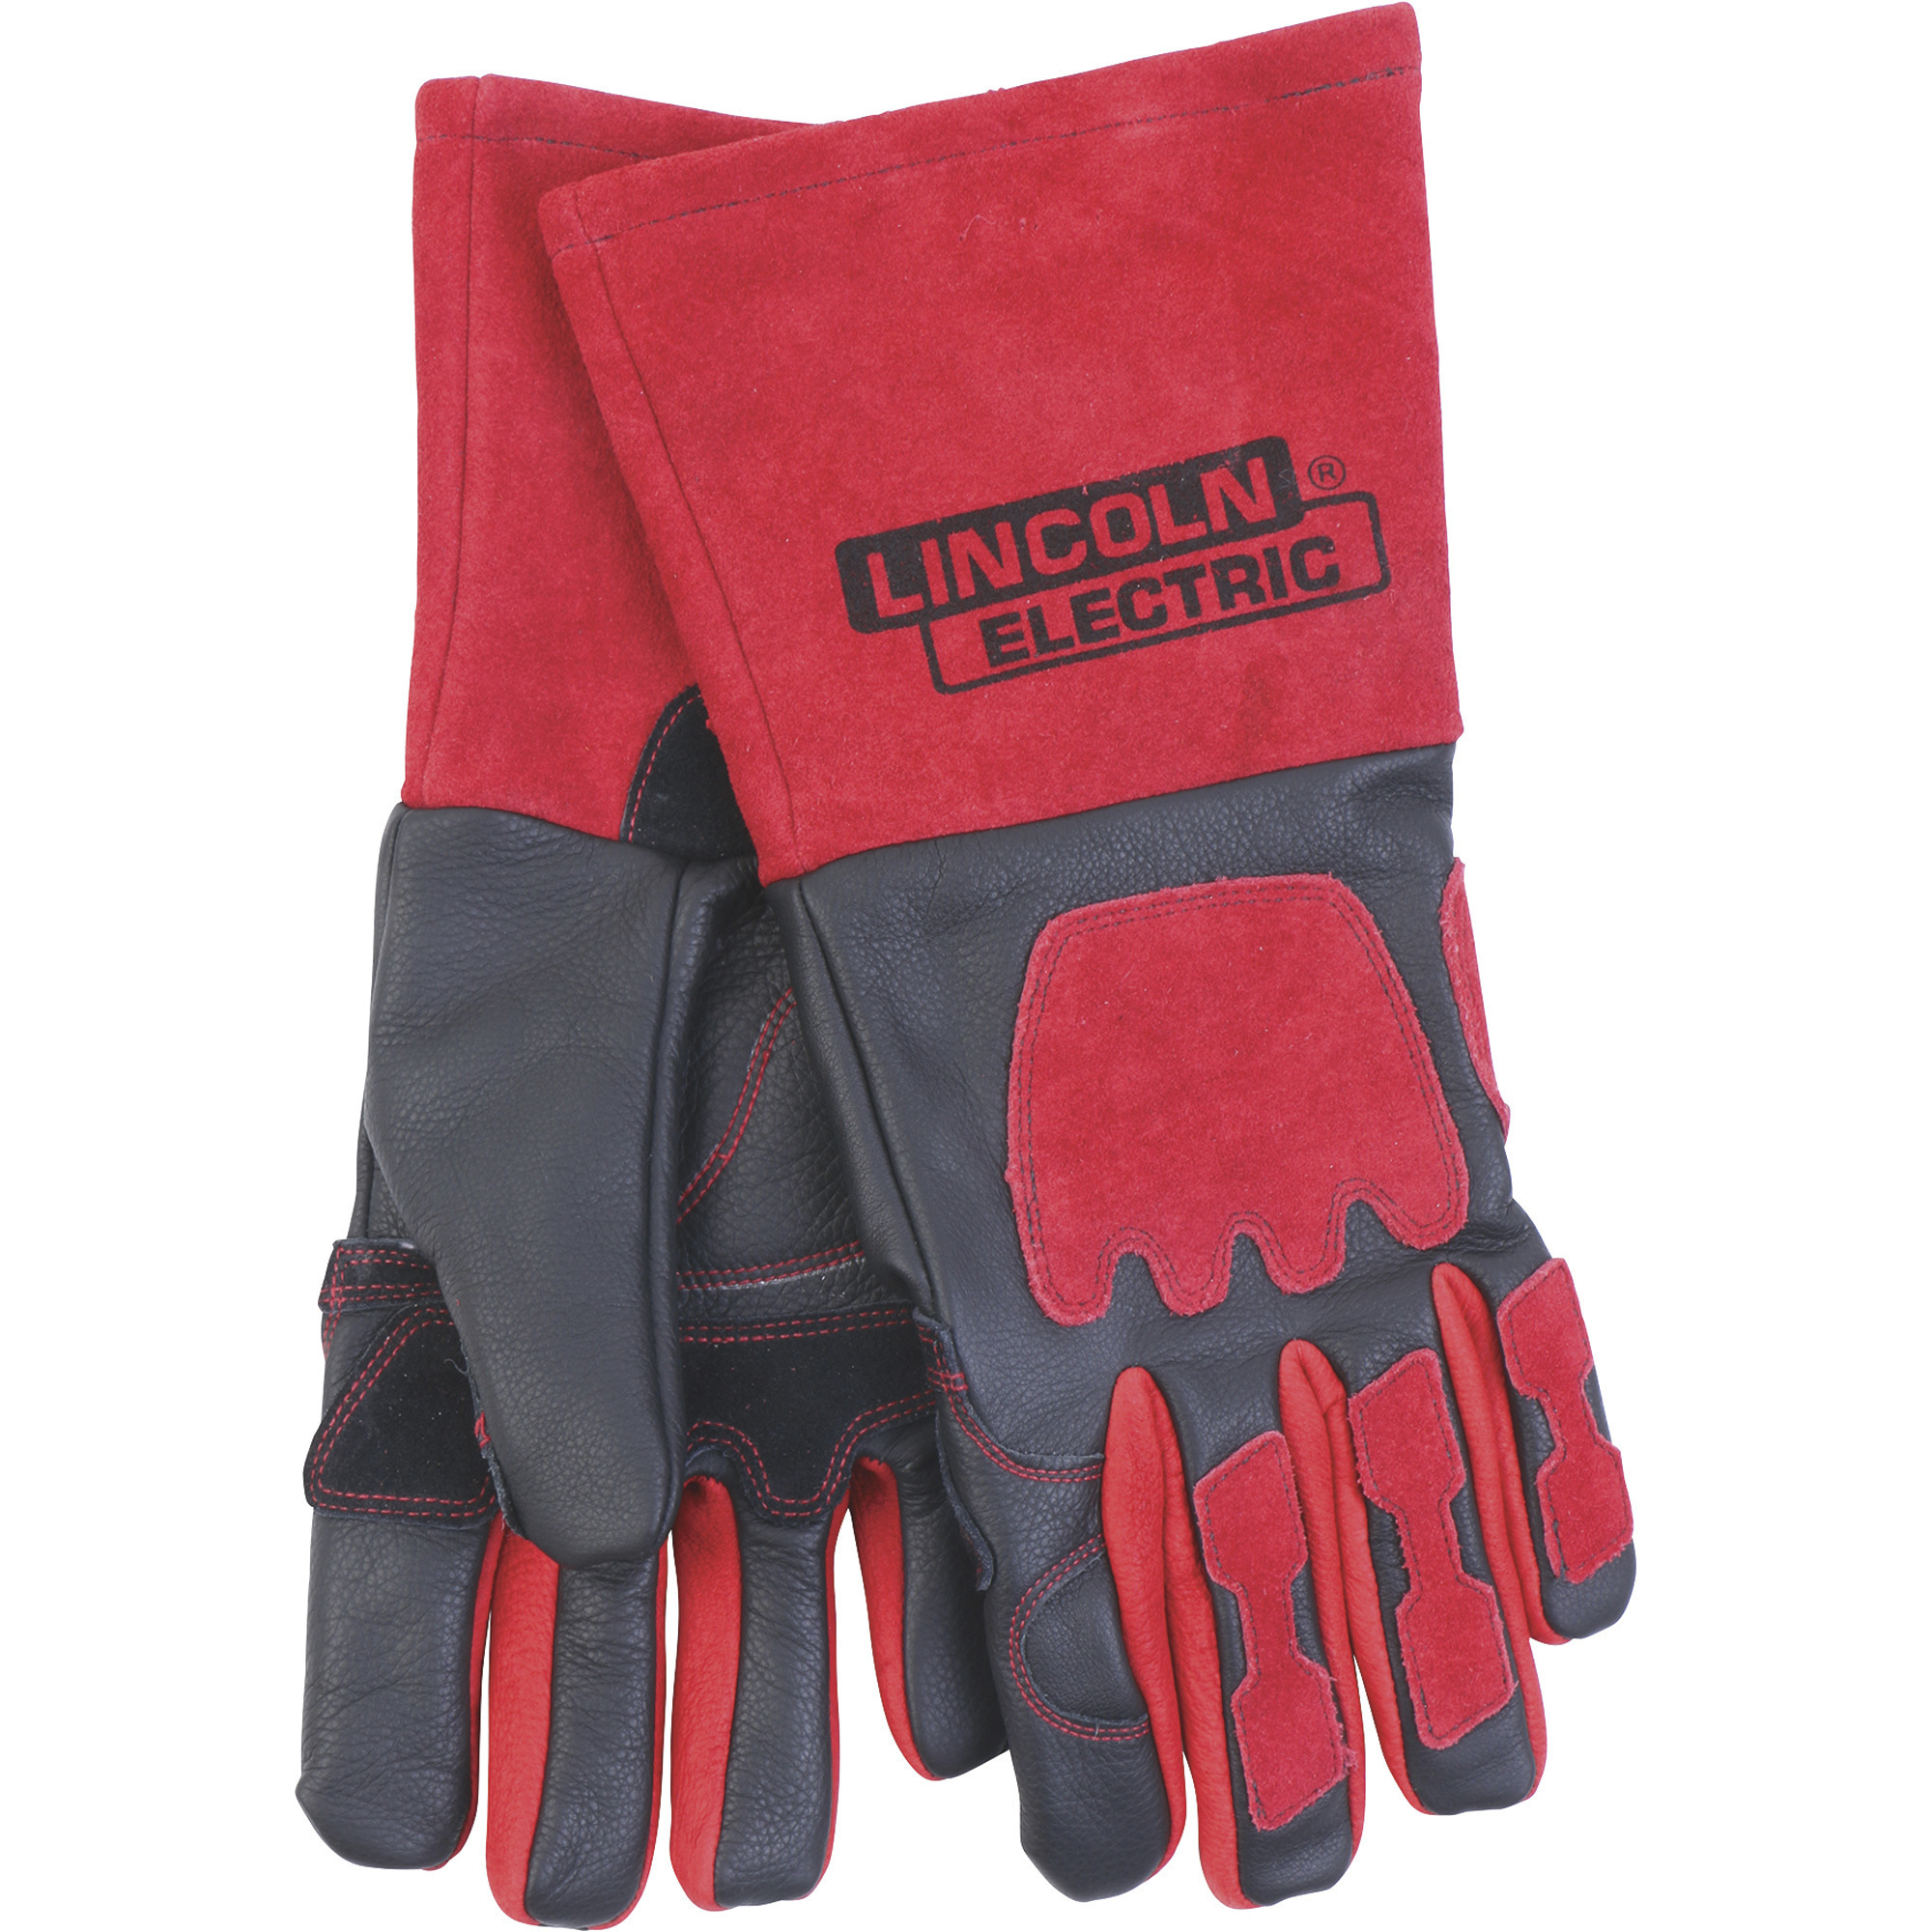 Lincoln Electric Premier Leather Welding Gloves, Red and Black, One Size Fits Most, Pair, Model KH962